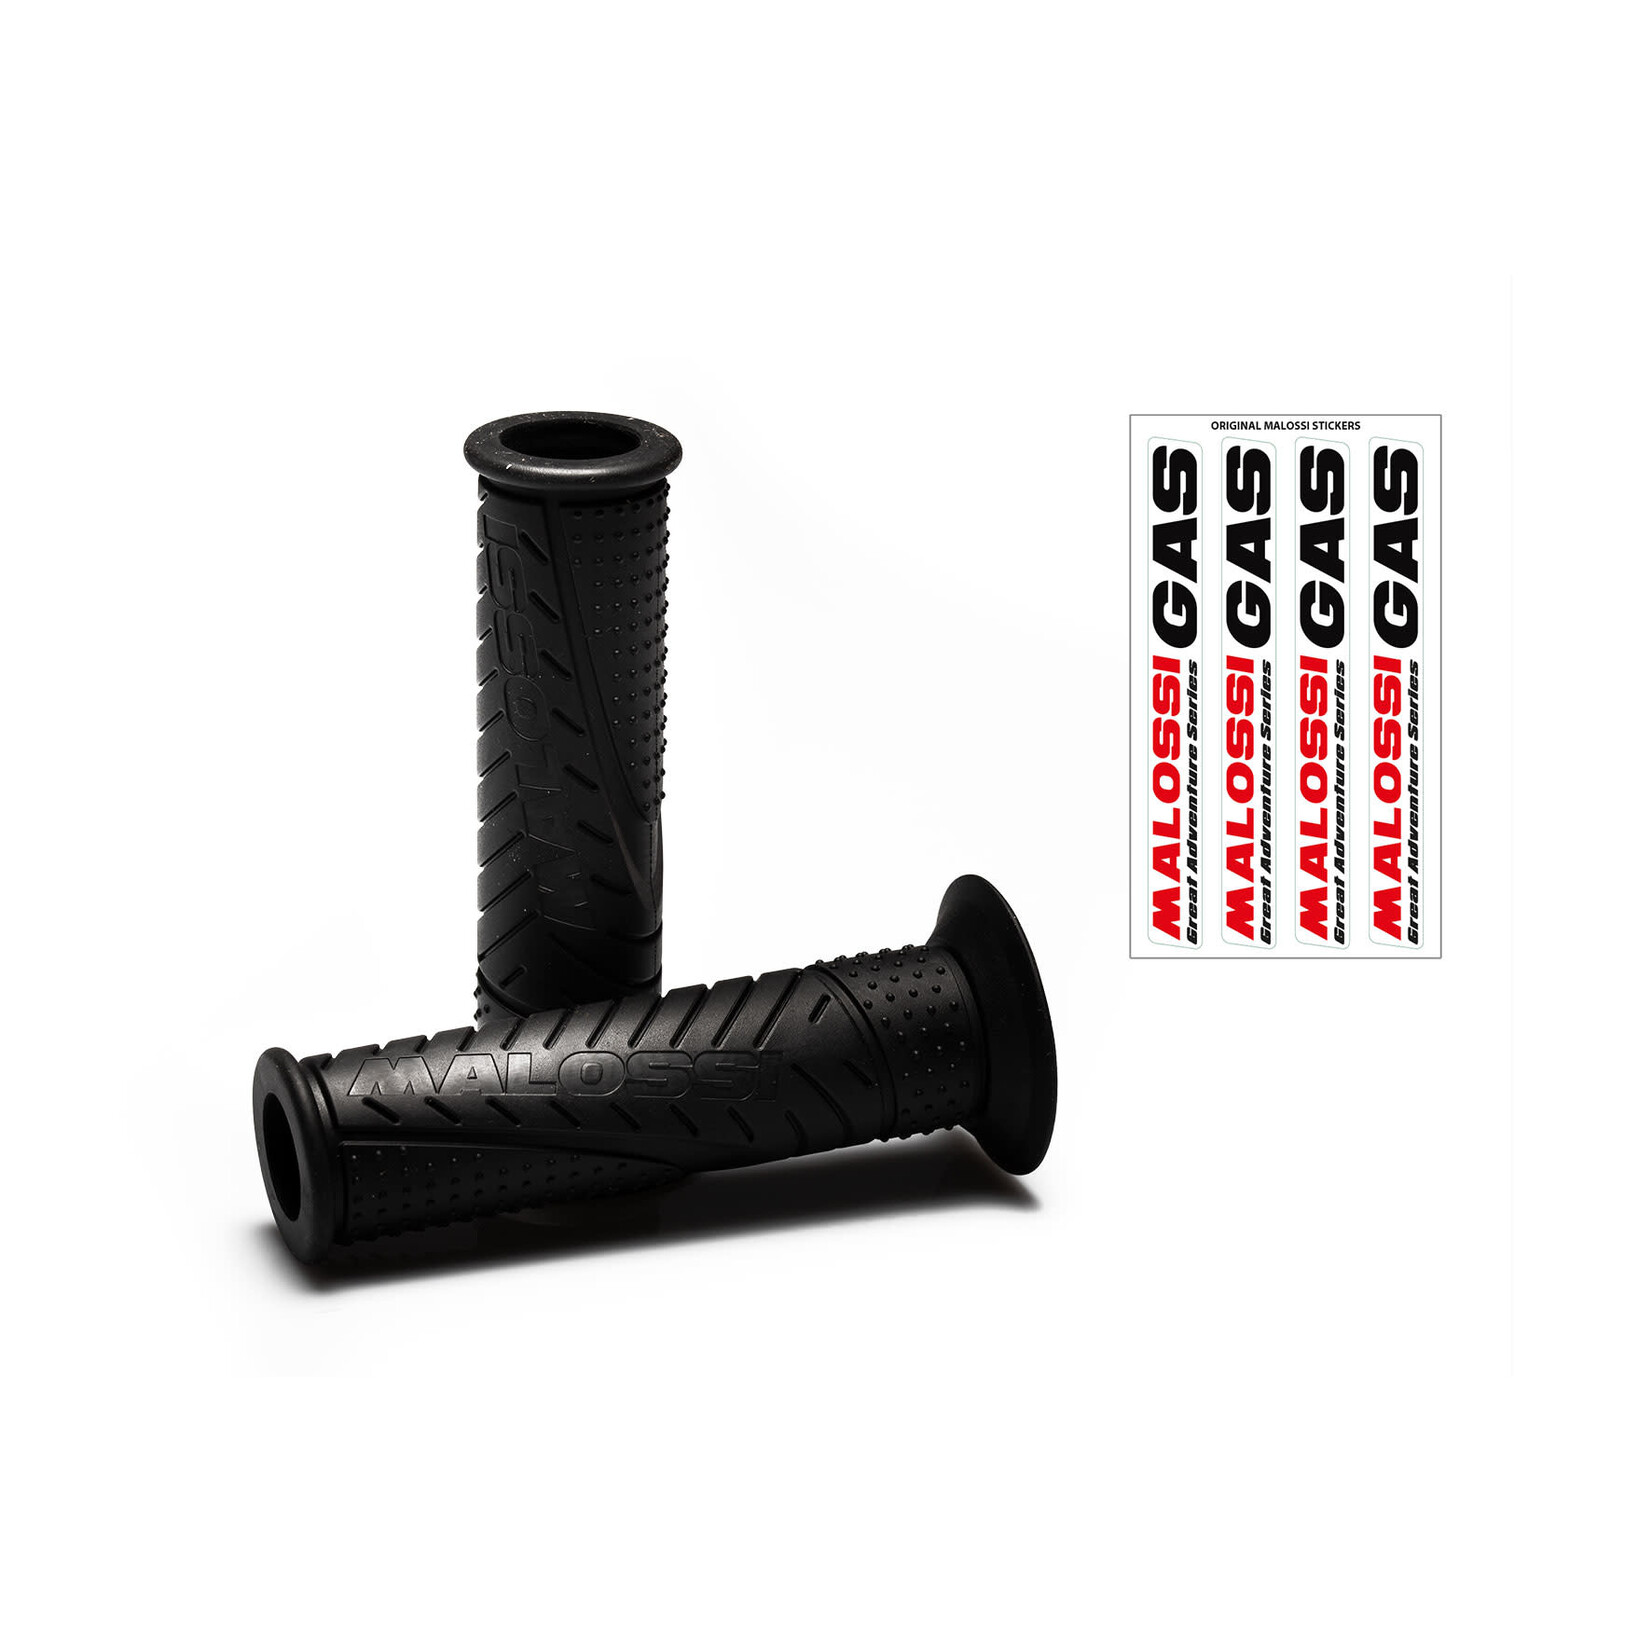 Malossi Malossi Grips - Black - Without sides